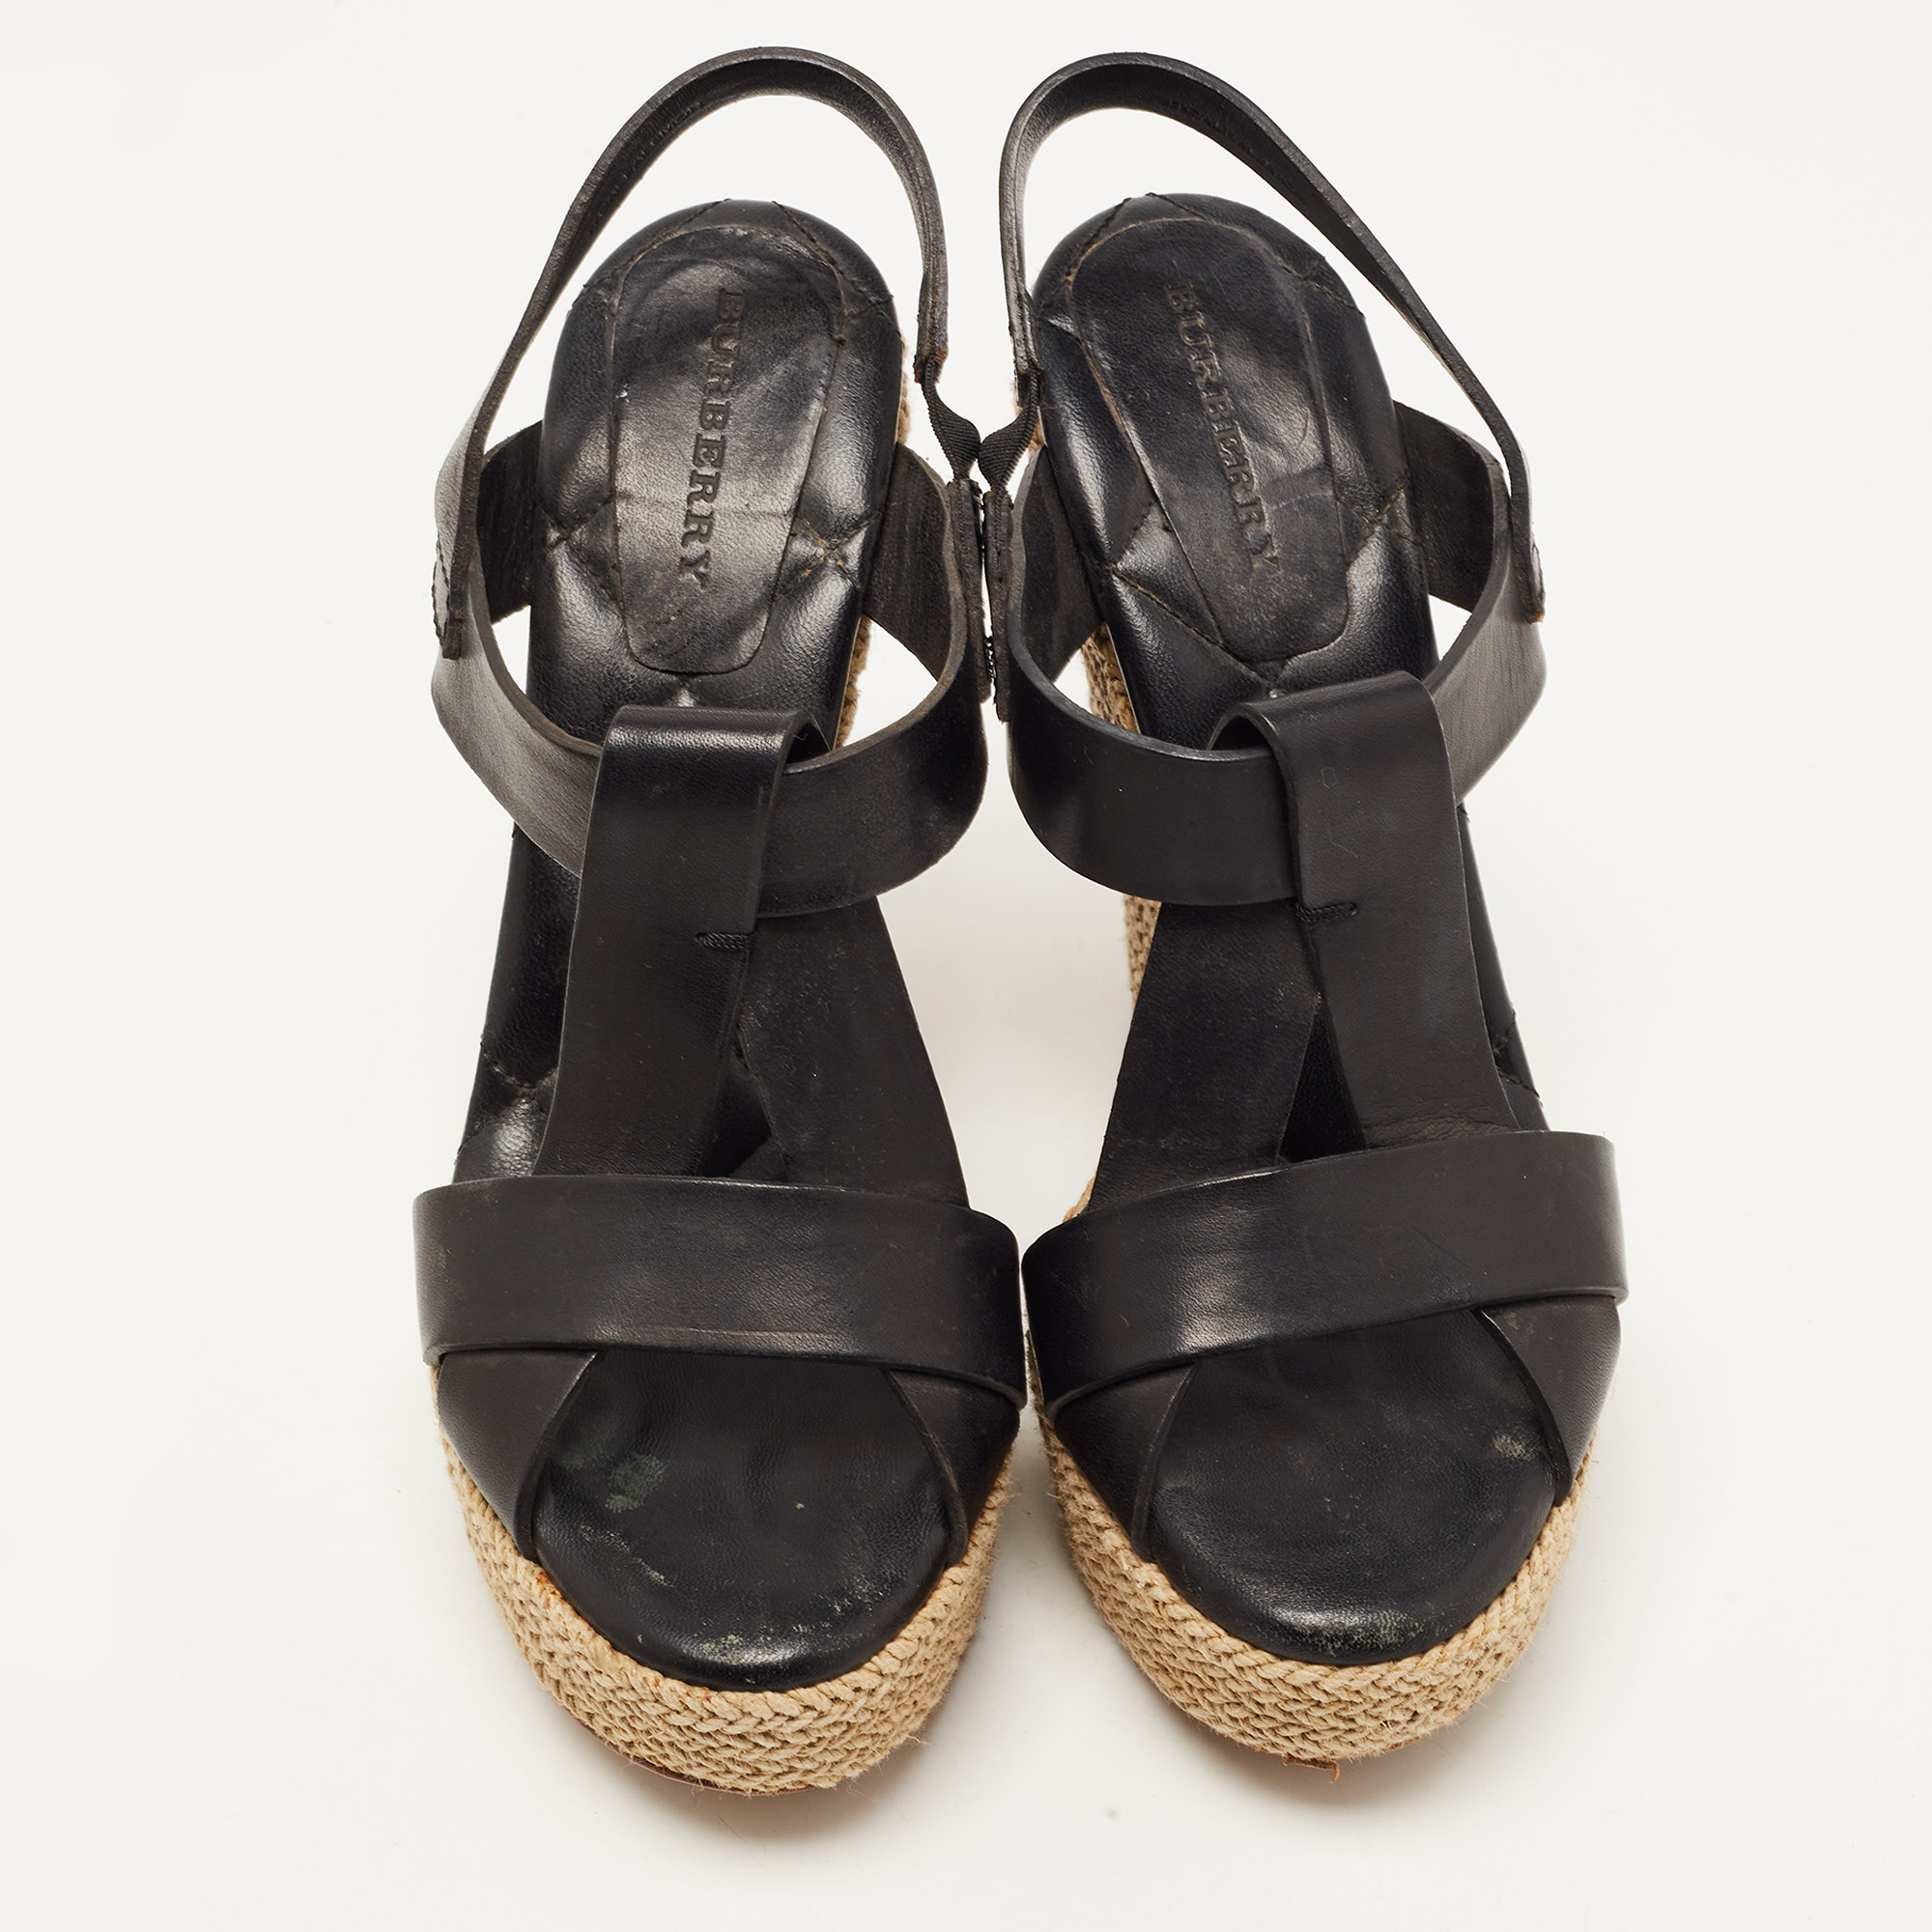 Burberry Black Leather Espadrille Wedge Strappy Sandals Size 39